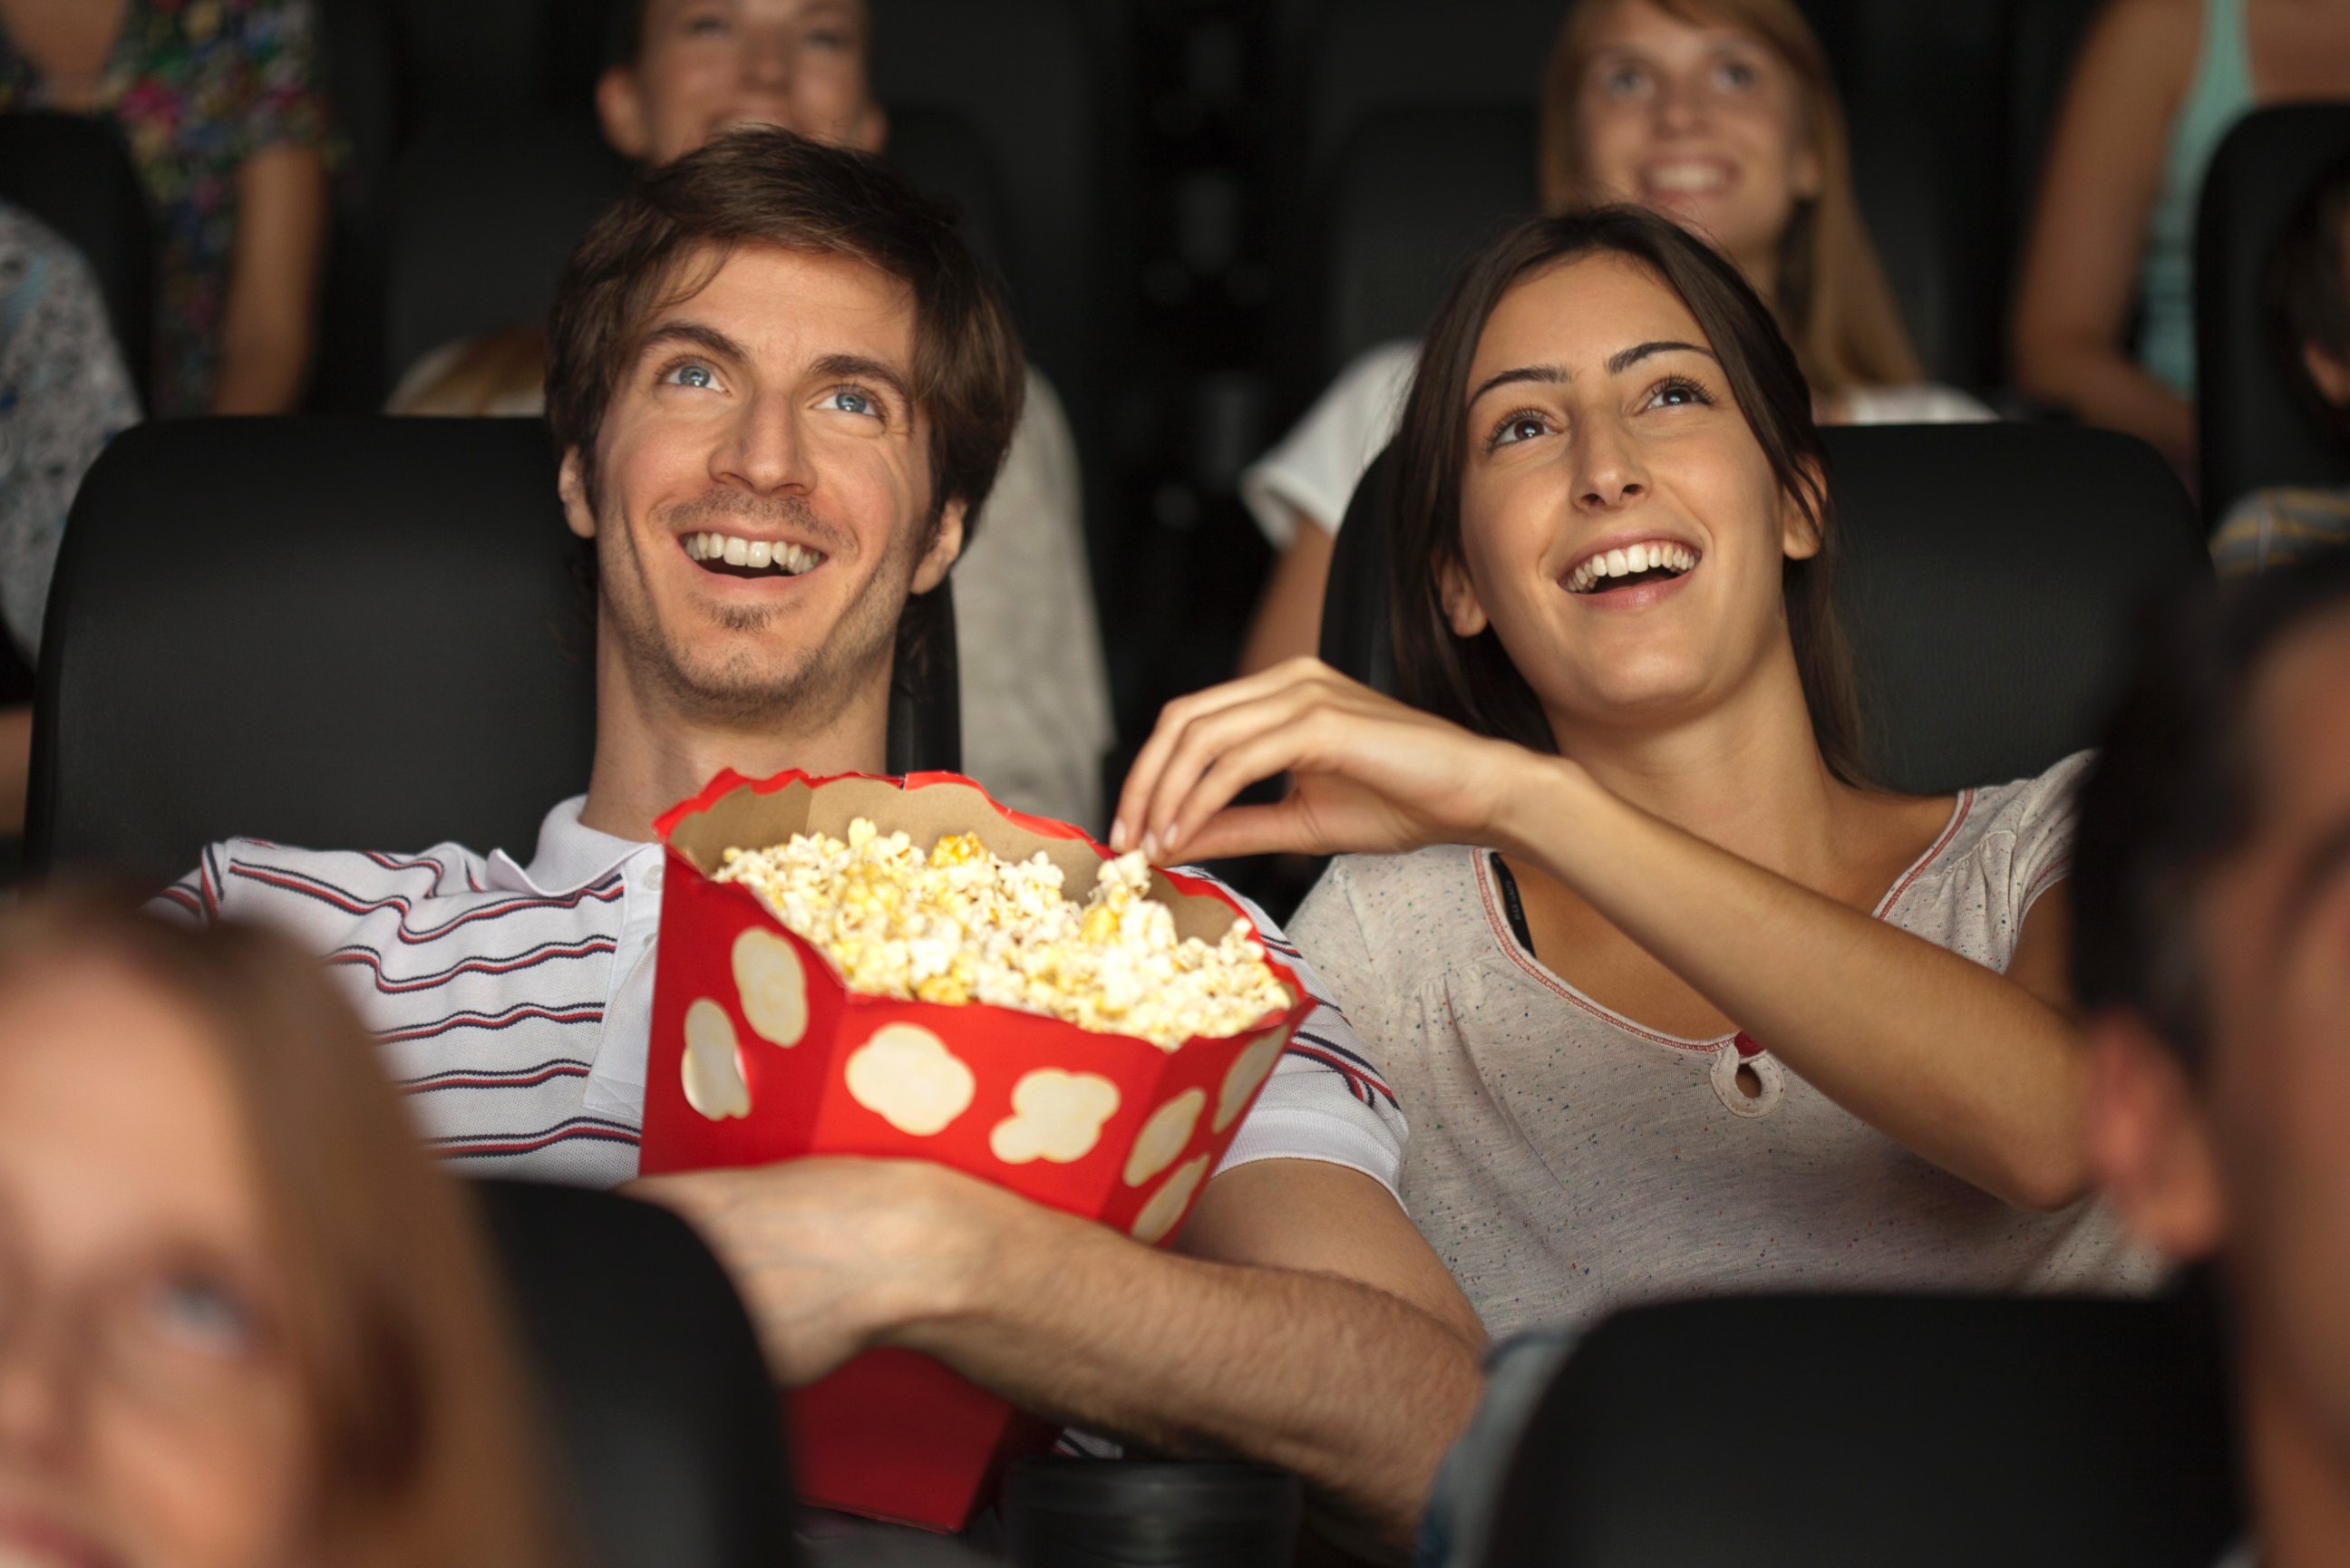 PHOTO: People are pictured watching a movie in this stock photo. 